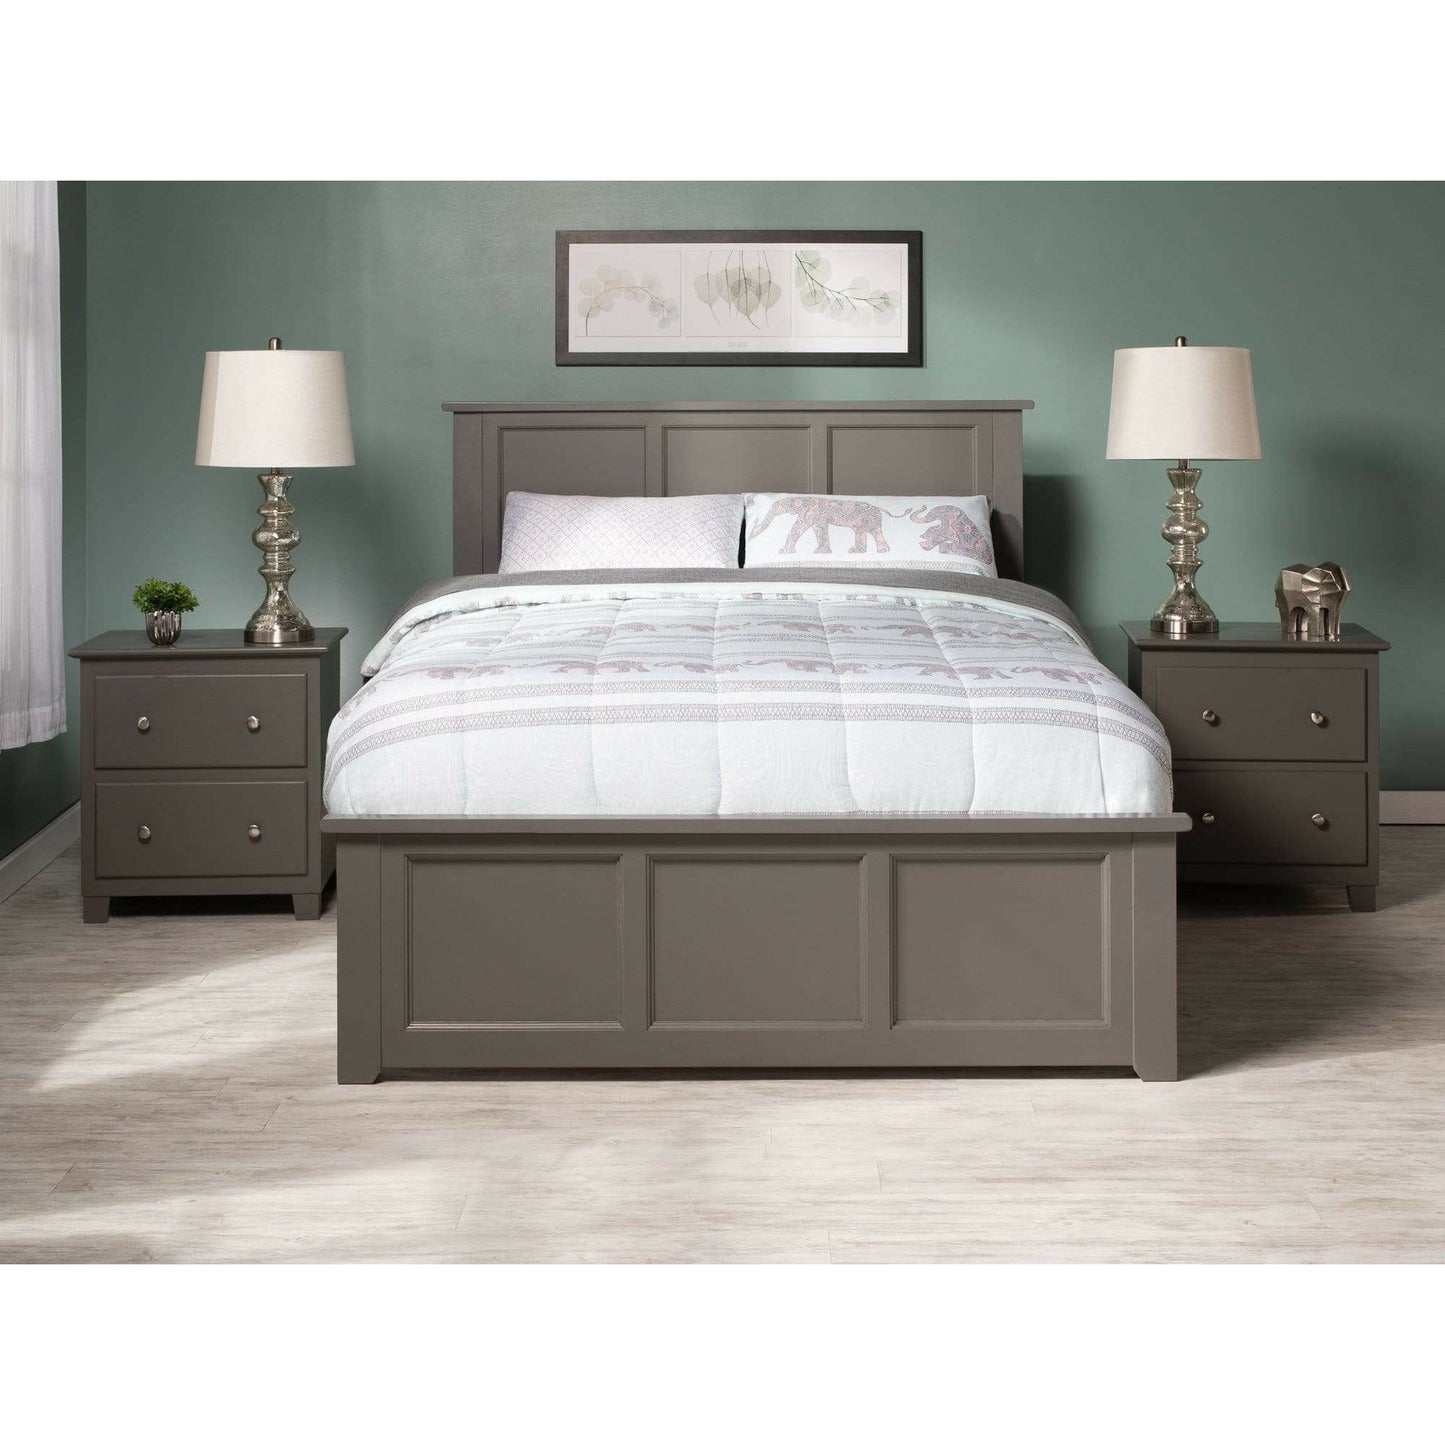 Atlantic Furniture Bed Grey Madison Full Platform Bed with Matching Foot Board with 2 Urban Bed Drawers in Espresso